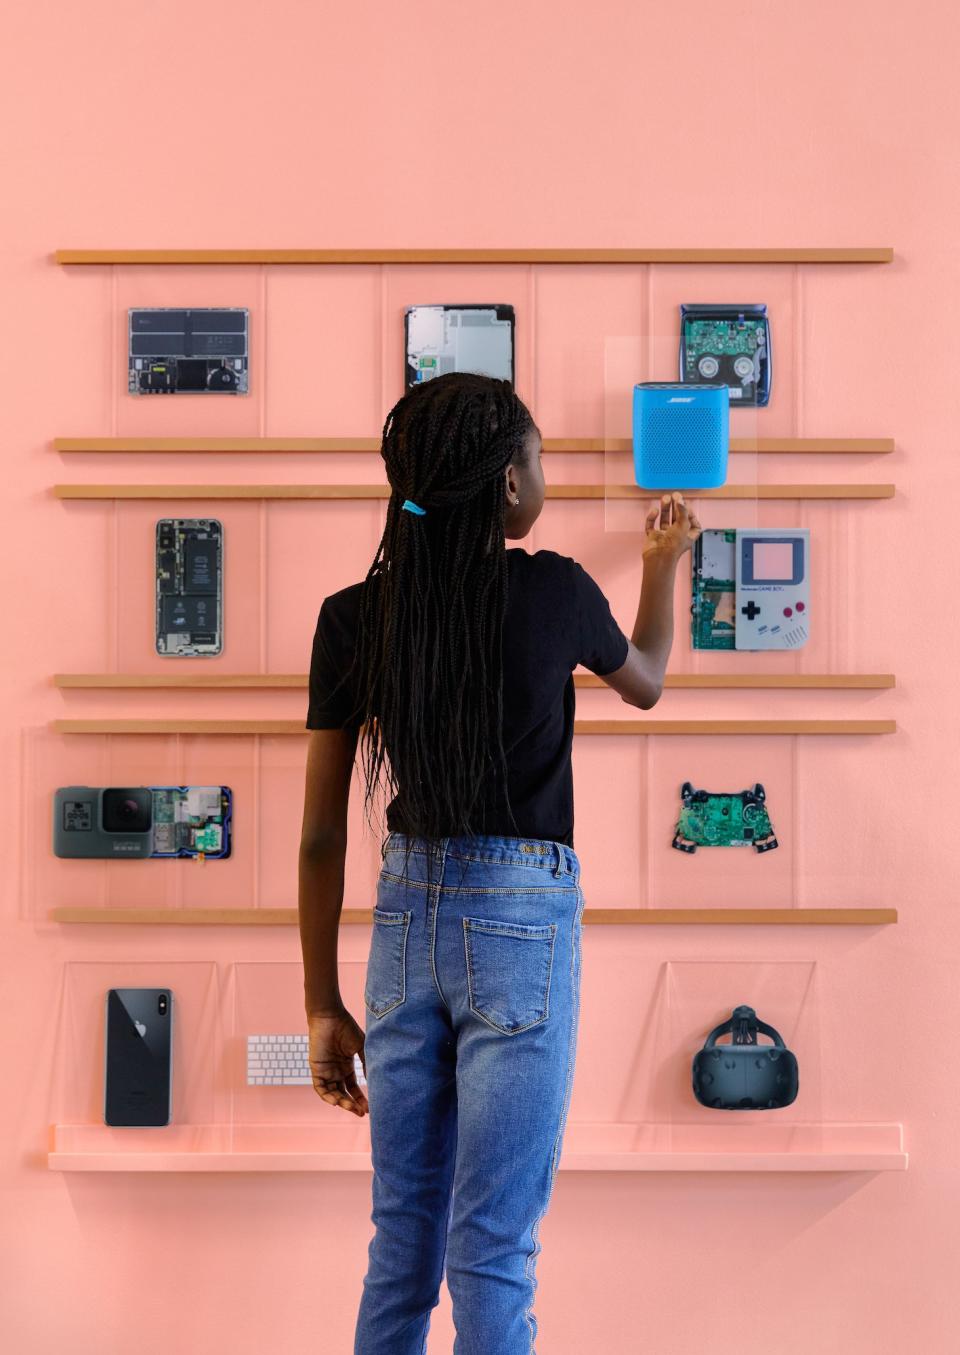 A young girl studies the inner makings of various devices on the wall.